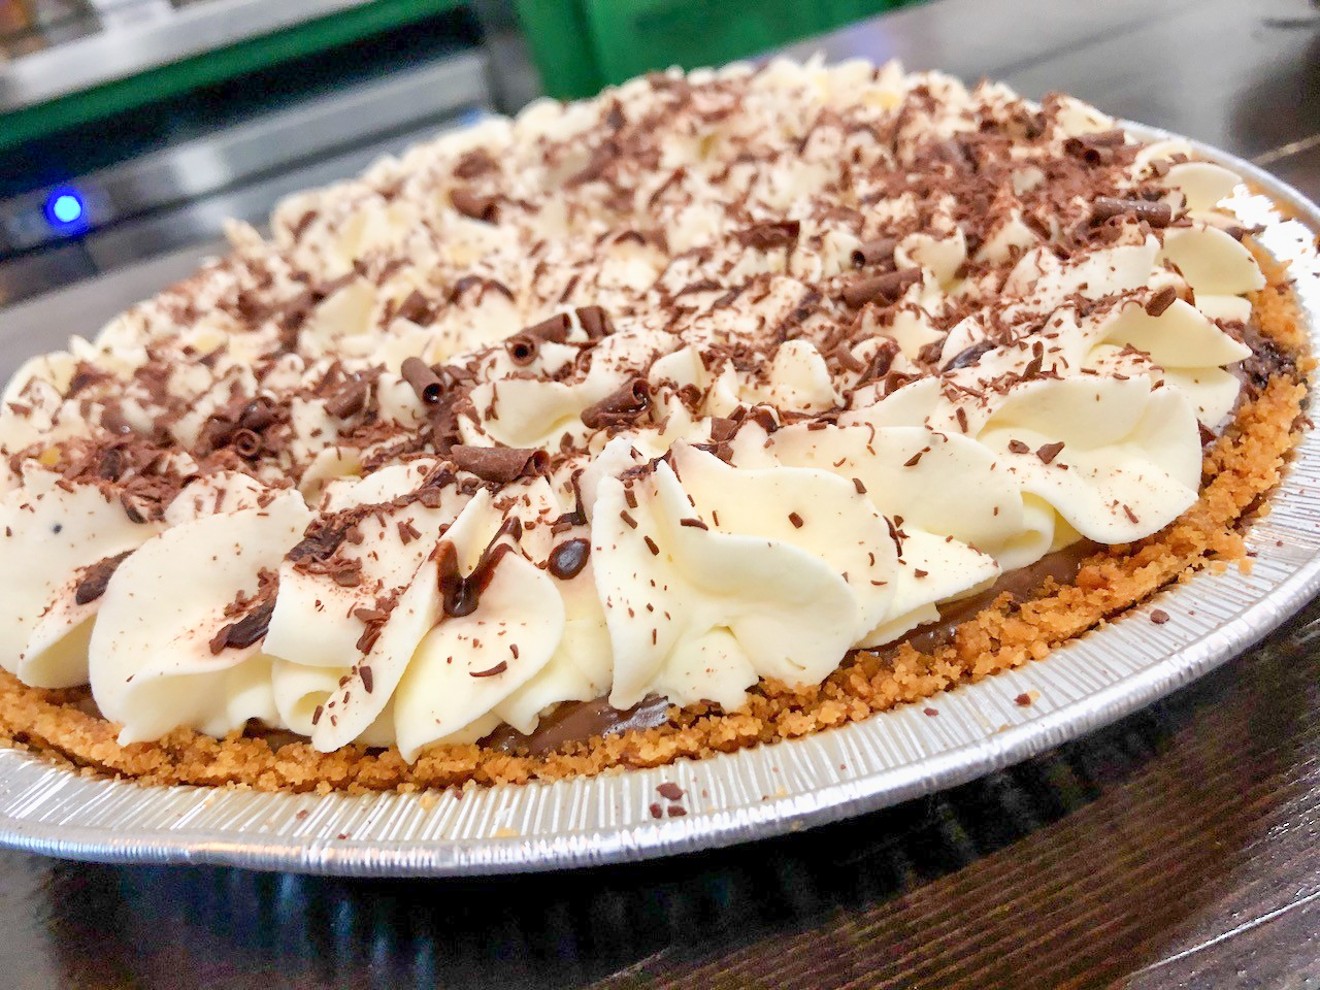 The Chocolate Cream Pie at the Dasher Pie Co.